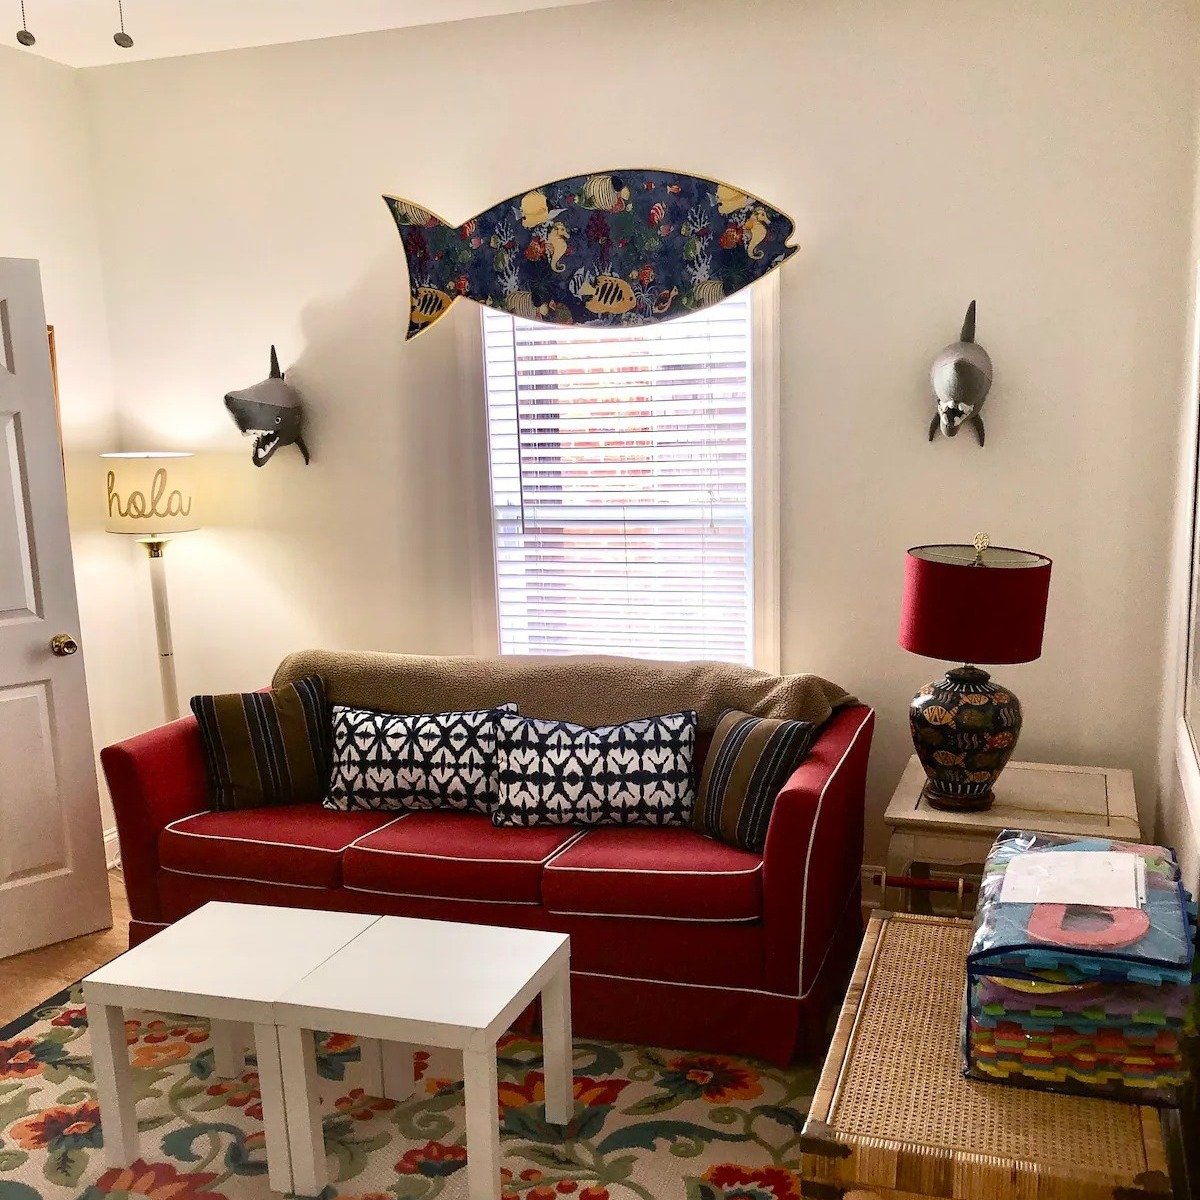 Toys, toys, and more toys! 🧸 Get ready for non-stop fun and laughter in this kid-approved room at Cape May Beach House. Who's ready to play?

Book your family getaway at the Sand Castle, our NJ Ave property in Cape May, NJ at CapeMayBeachHouse.com o